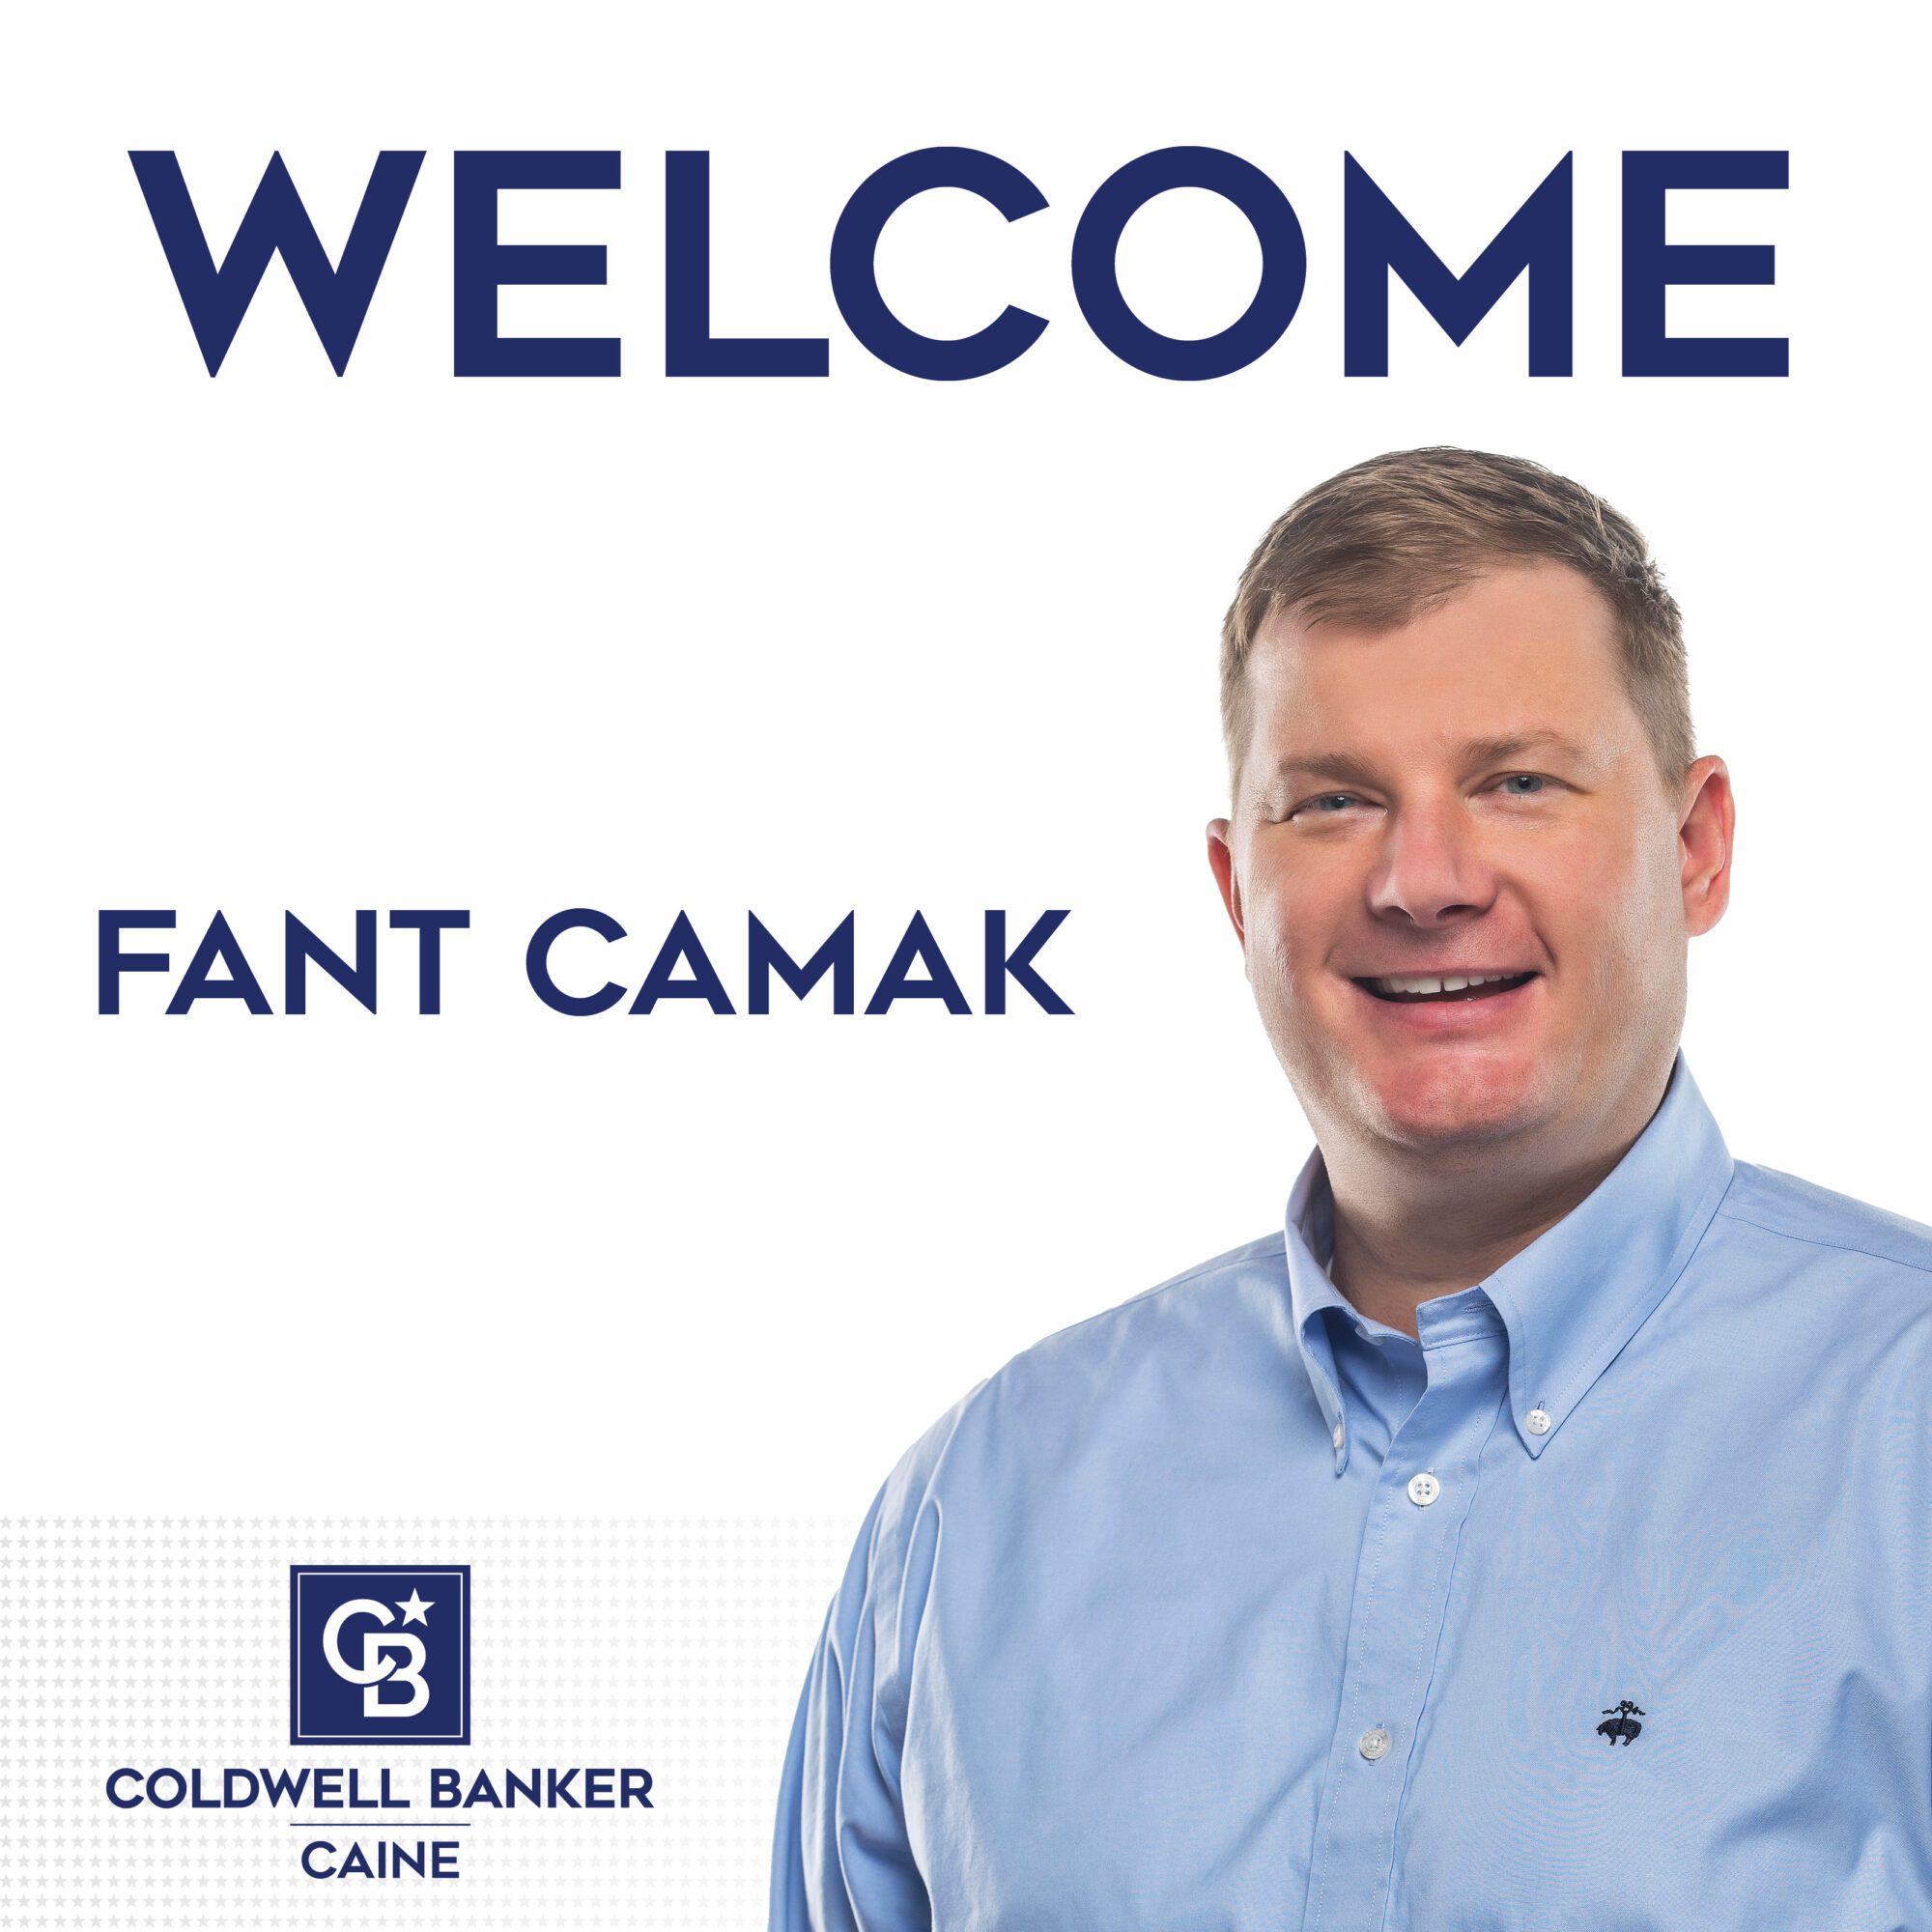 Fant Camak Joins Coldwell Banker Caine in Spartanburg